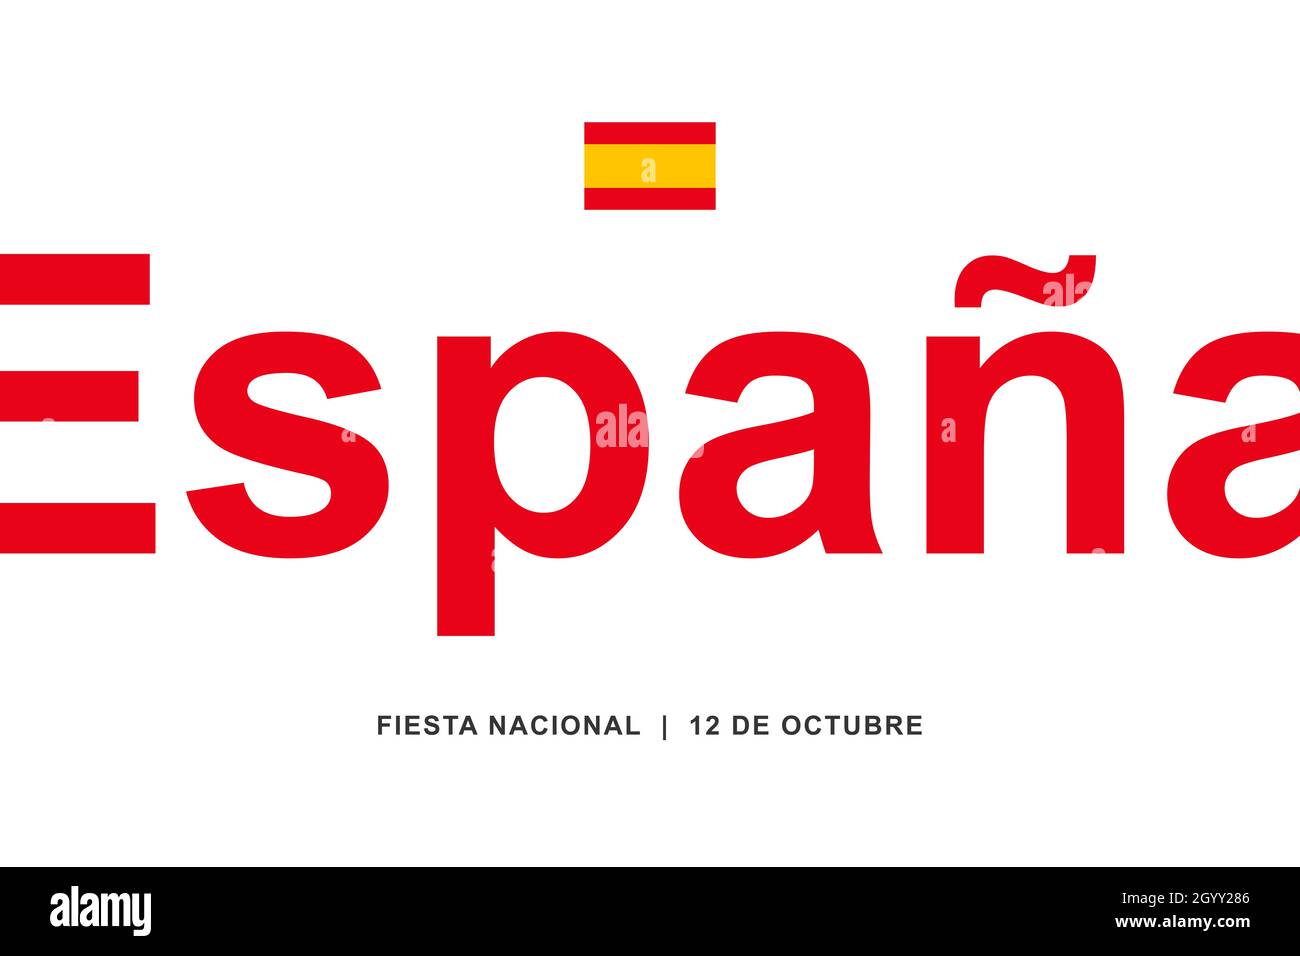 Spain National Day. Fiesta Nacional de Espana dia 12 de Octubre (Translated: The National Day of Spain on October 12). Poster, background Stock Photo